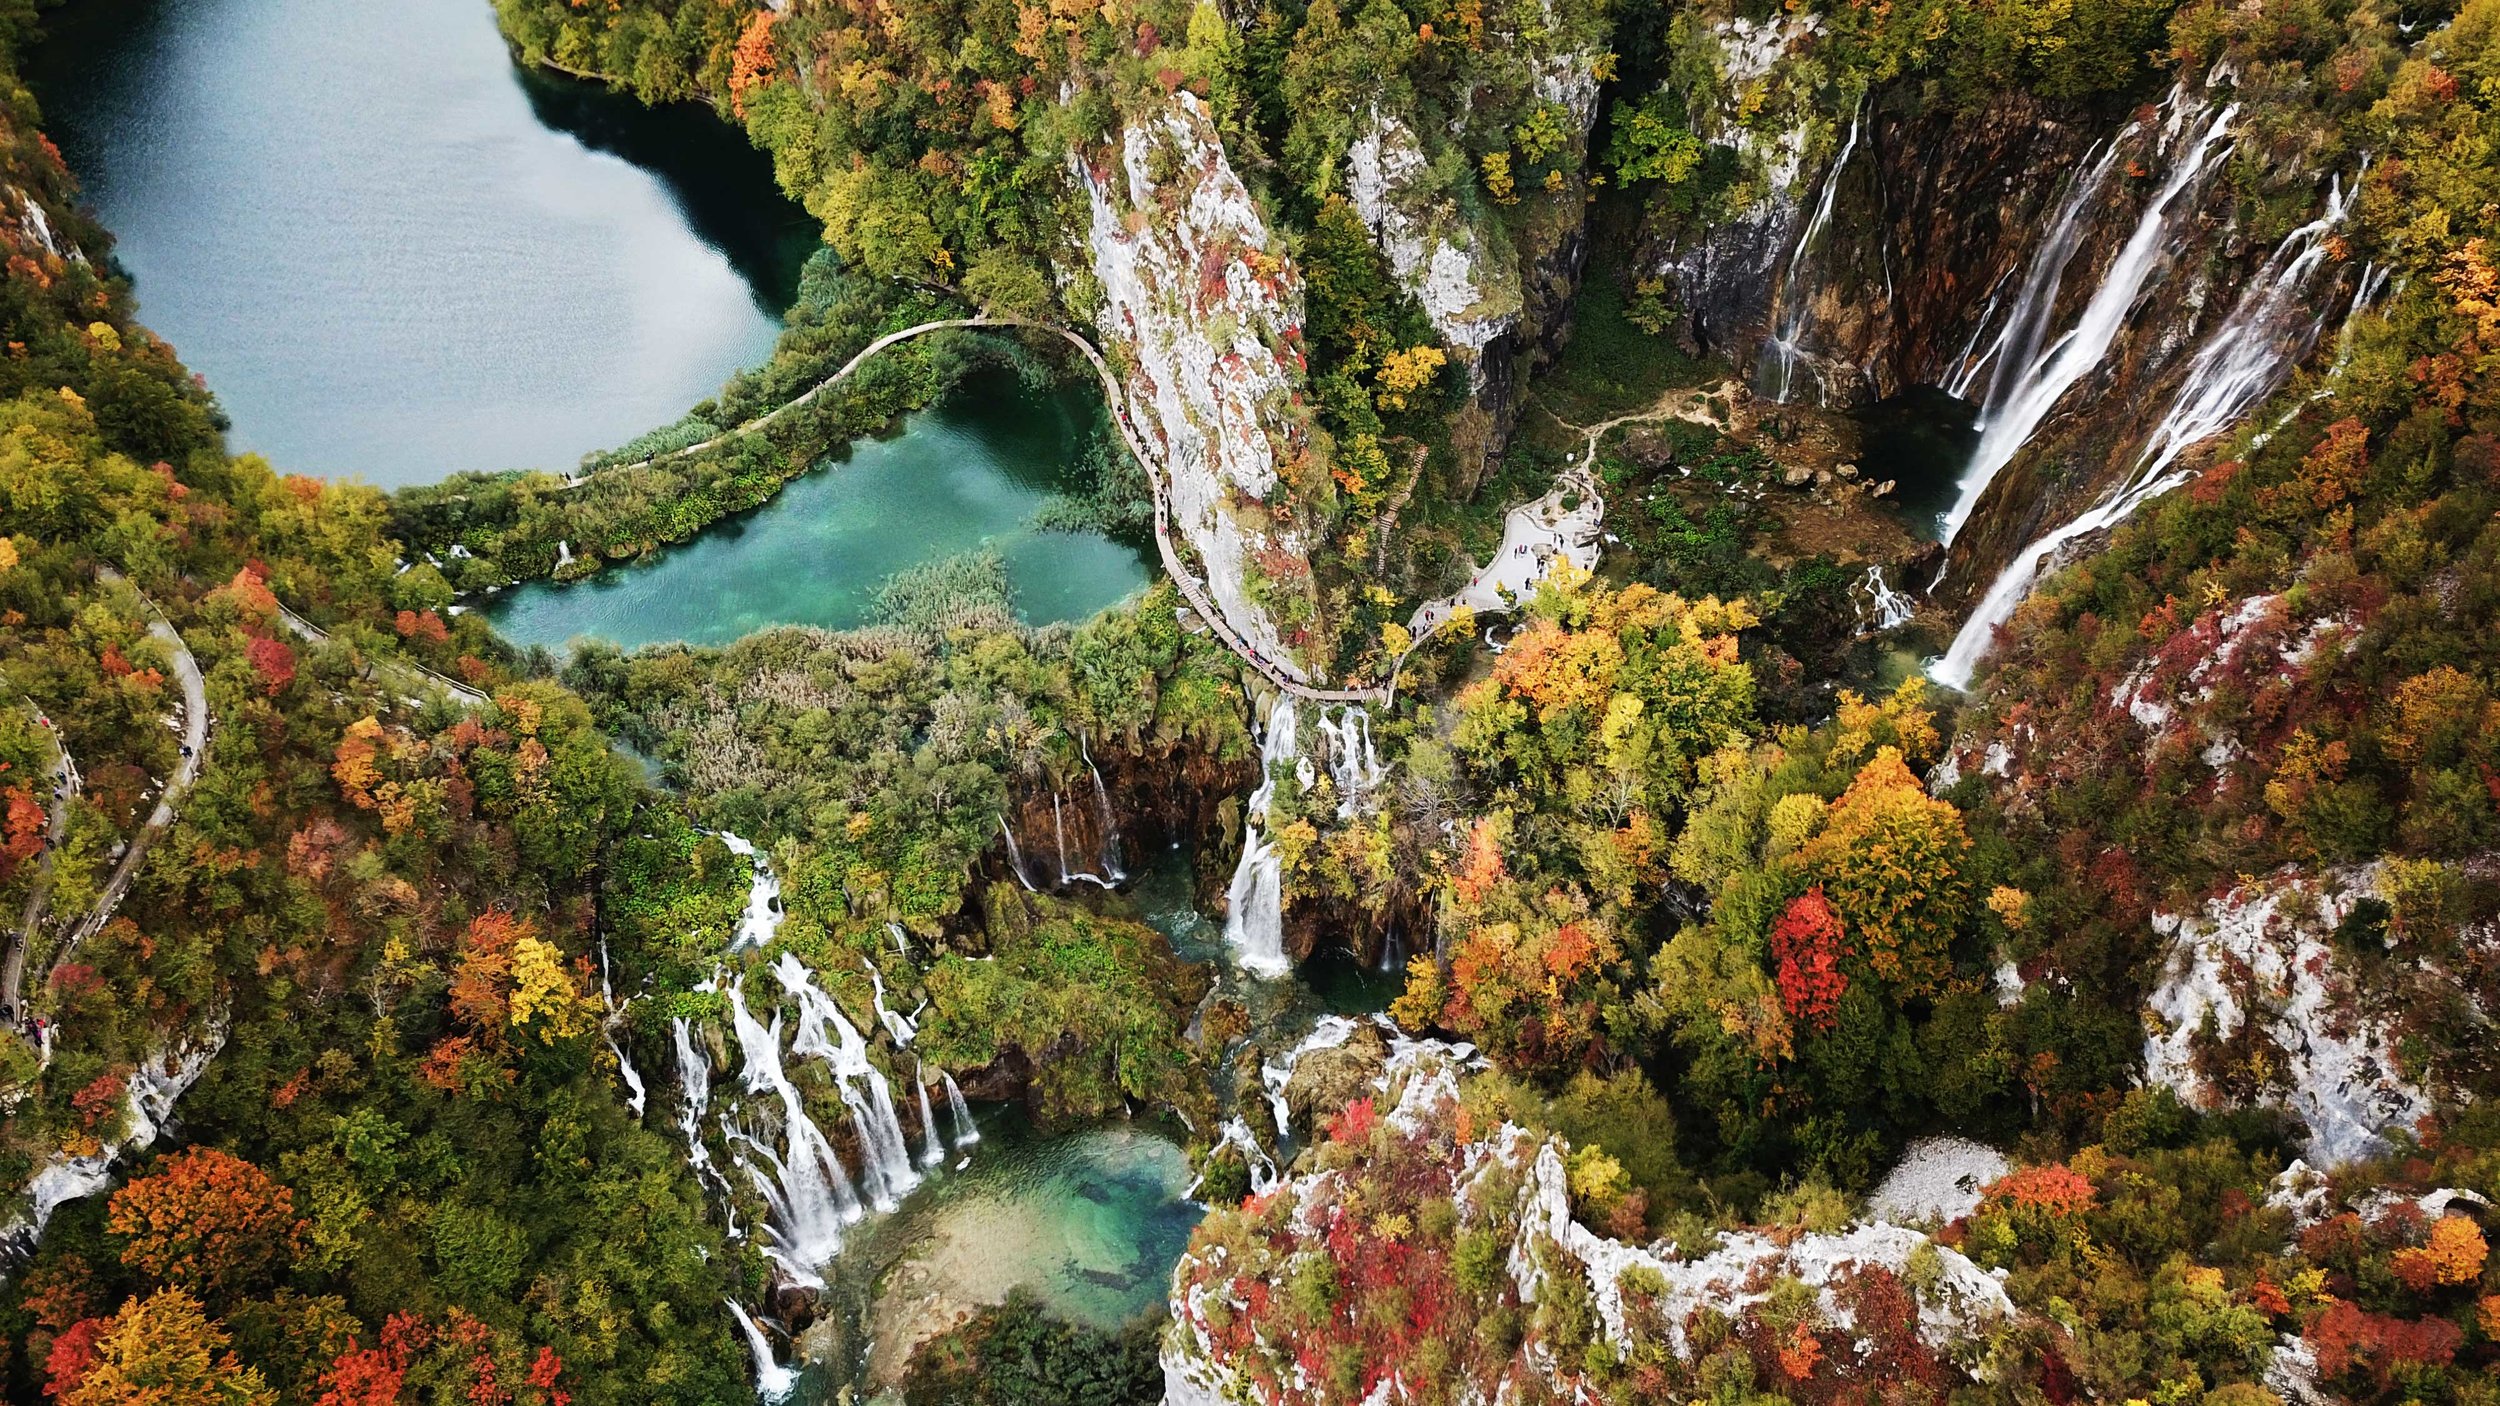  Aidan_Lincoln_Fowler_Drone_Aerial_Photography_Plitvice_Lakes_National_Park_Waterfalls